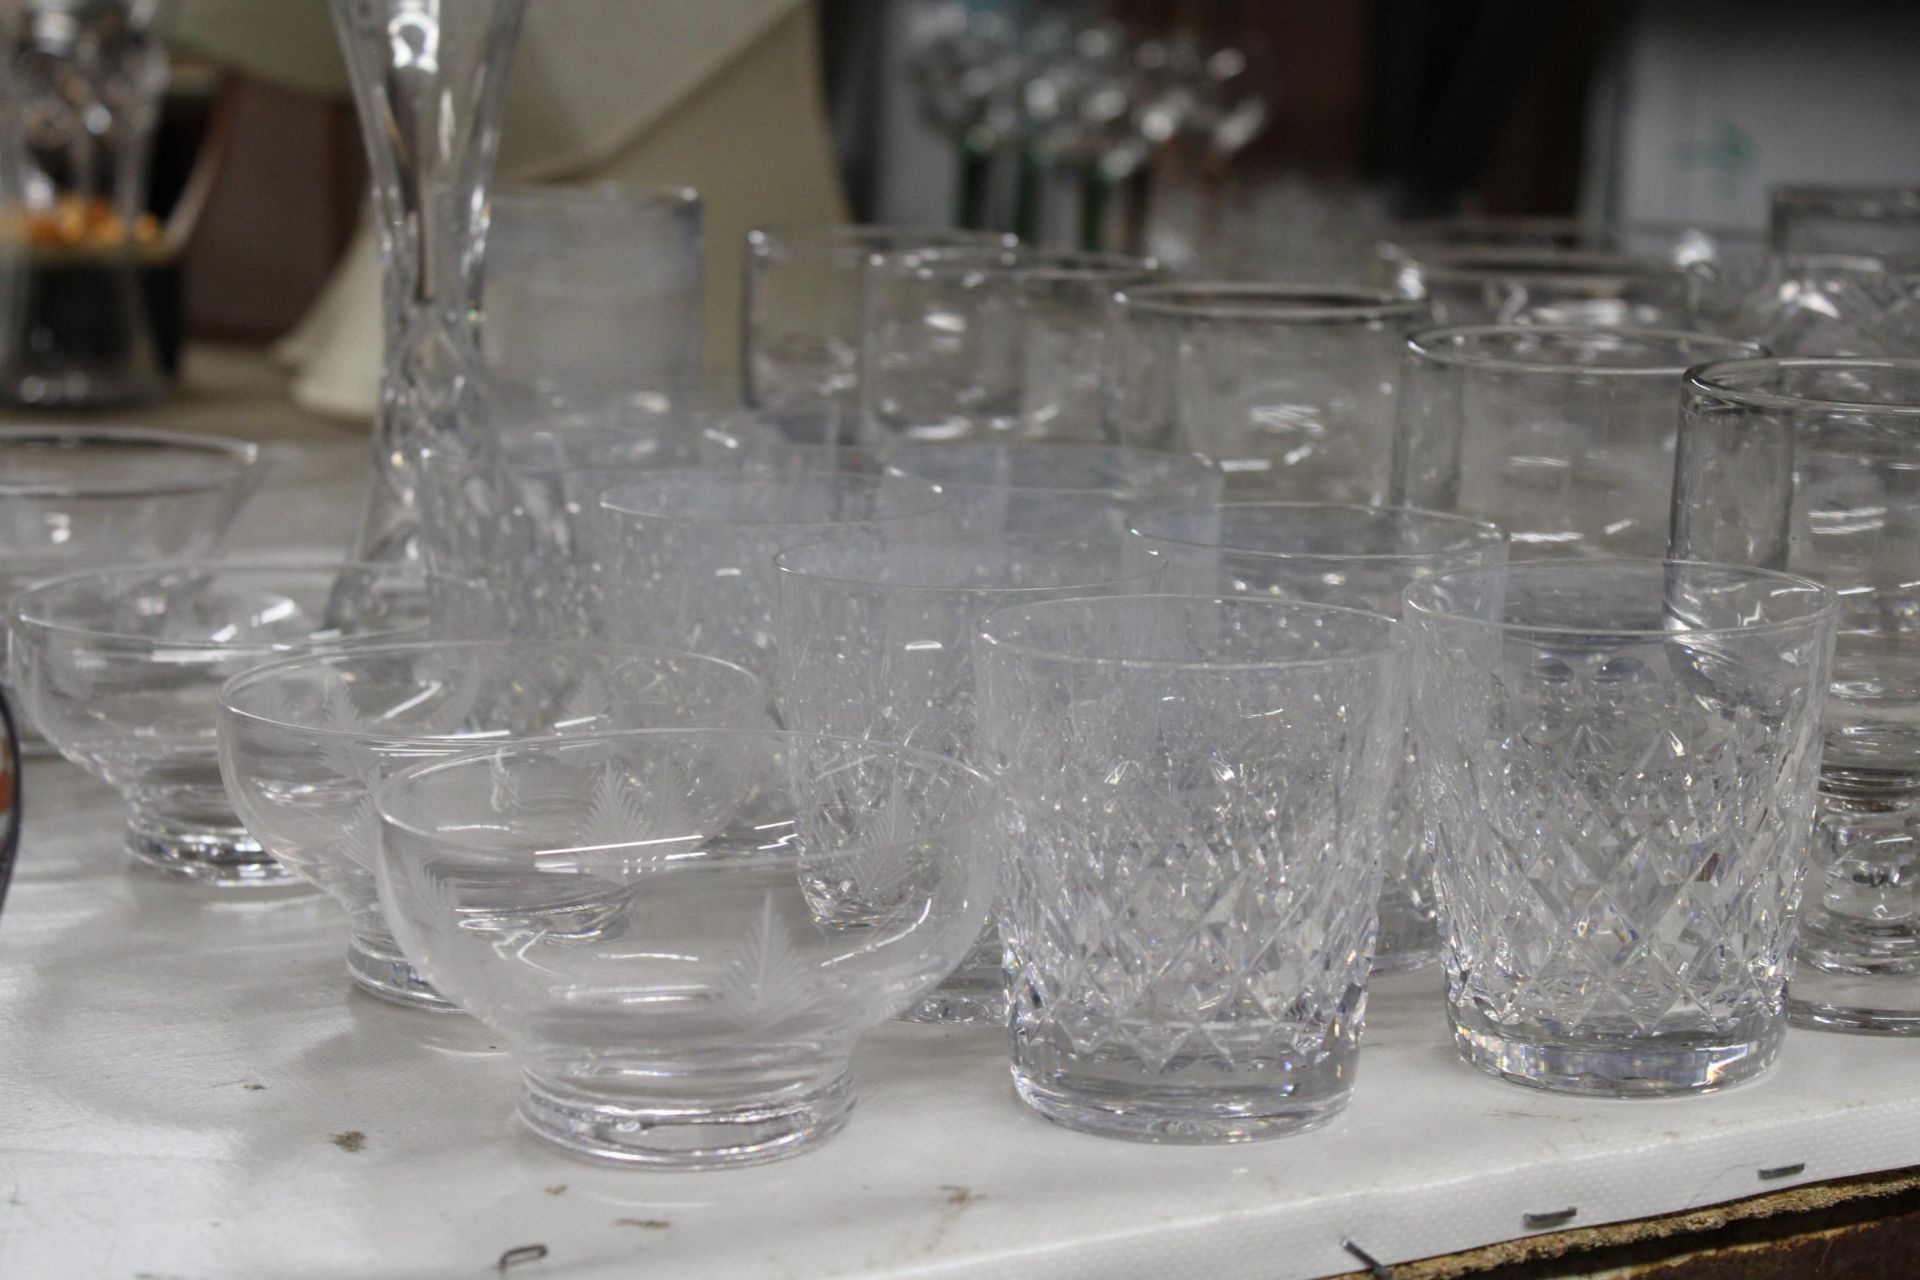 A LARGE COLLECTION OF GLASSWARE TO INCLUDE DESSERT DISHES, JUGS, WINE GLASSES ETC - Image 2 of 6